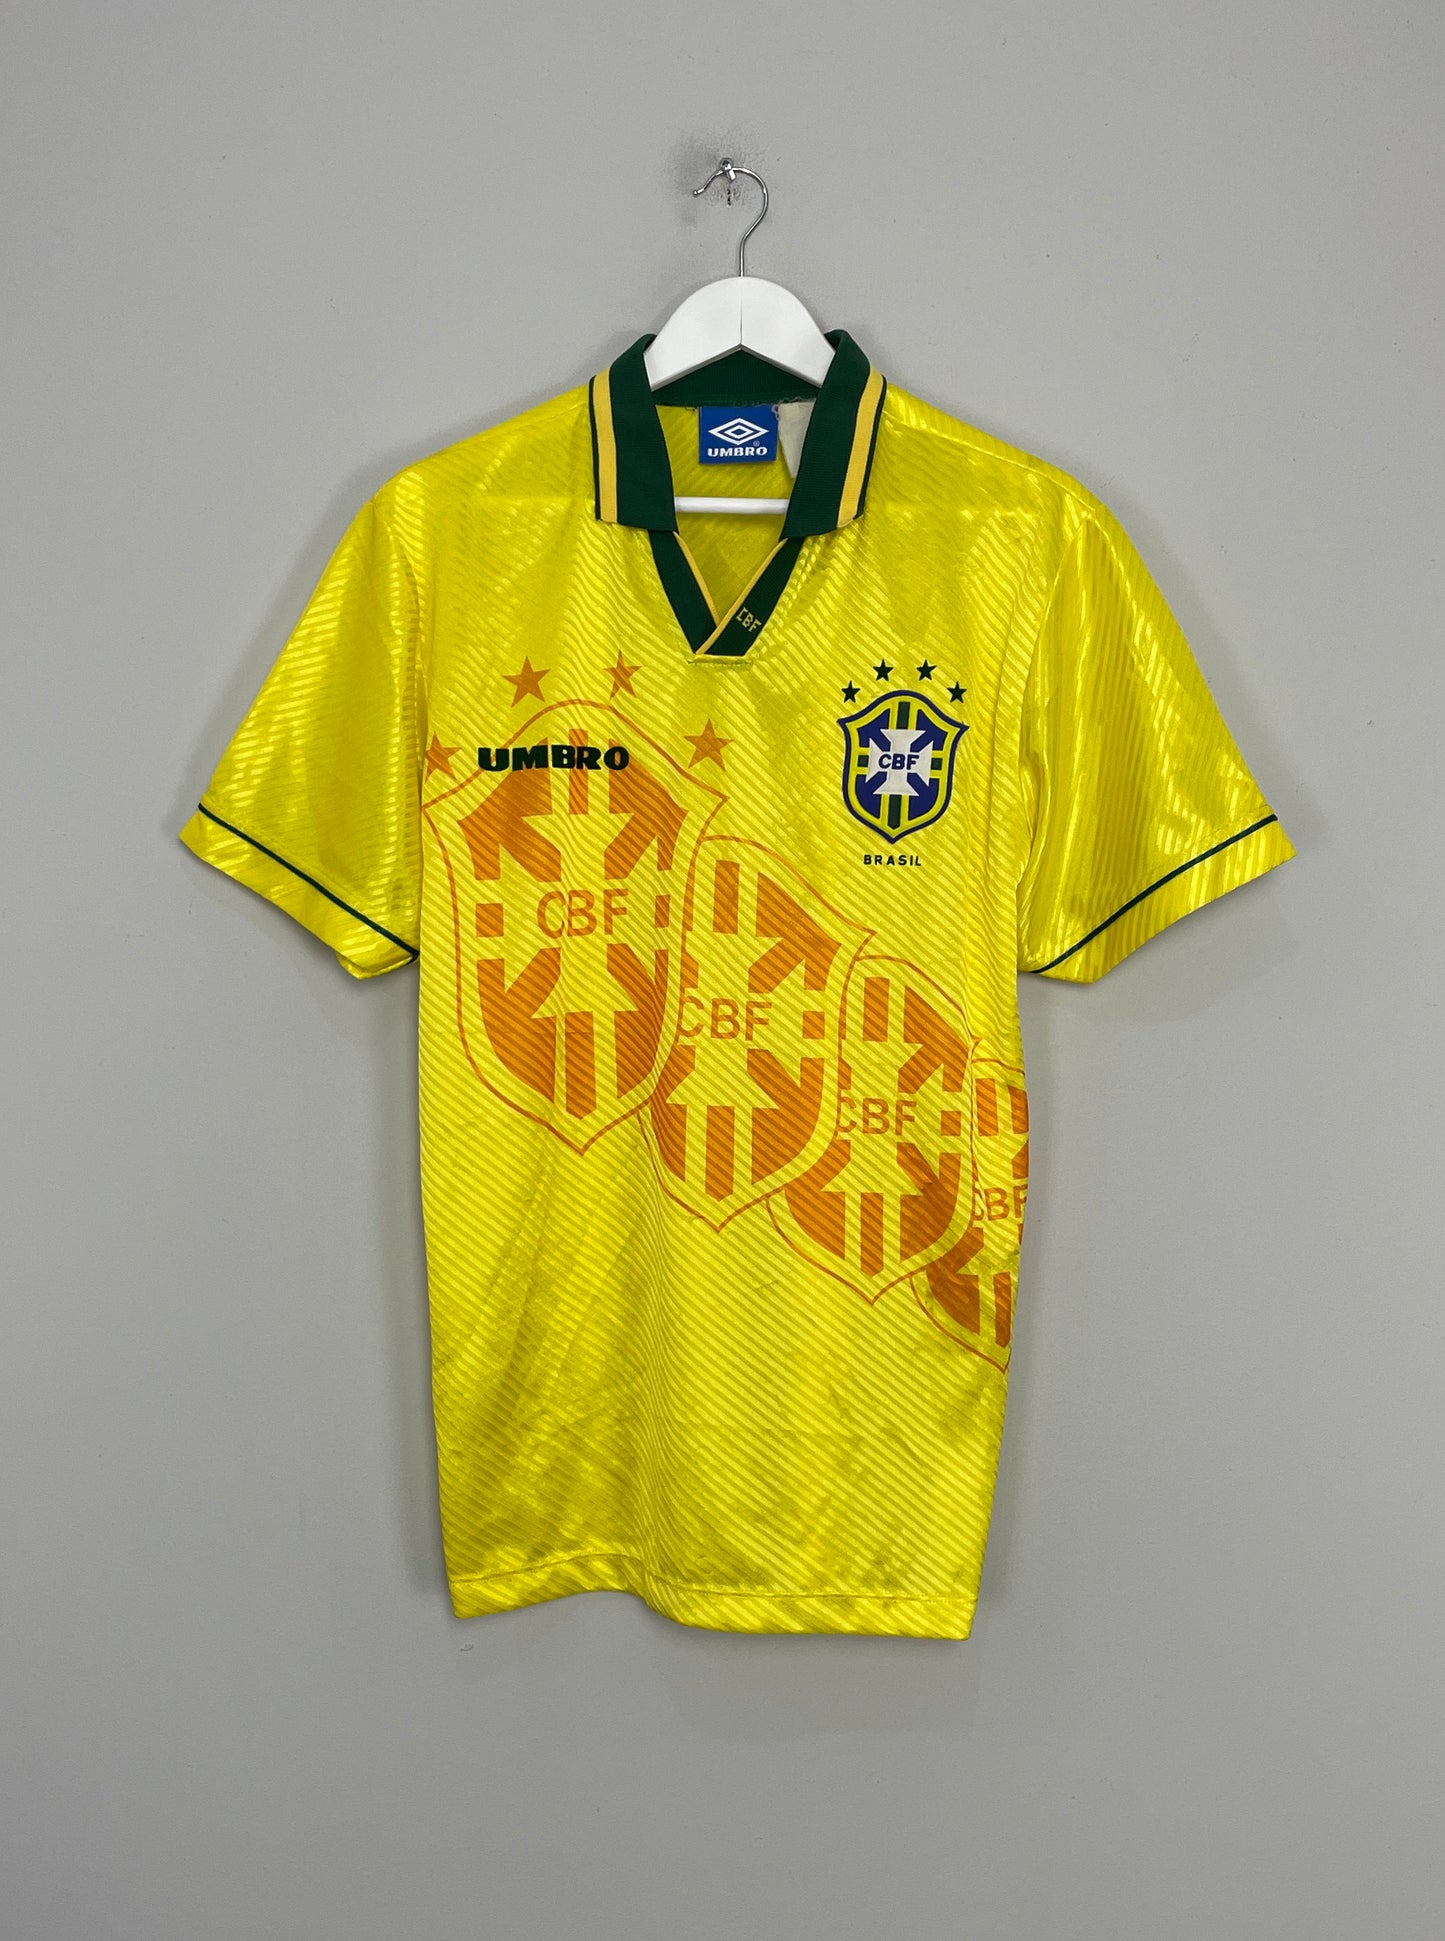 Image of the brazil shirt from the 1994/96 season